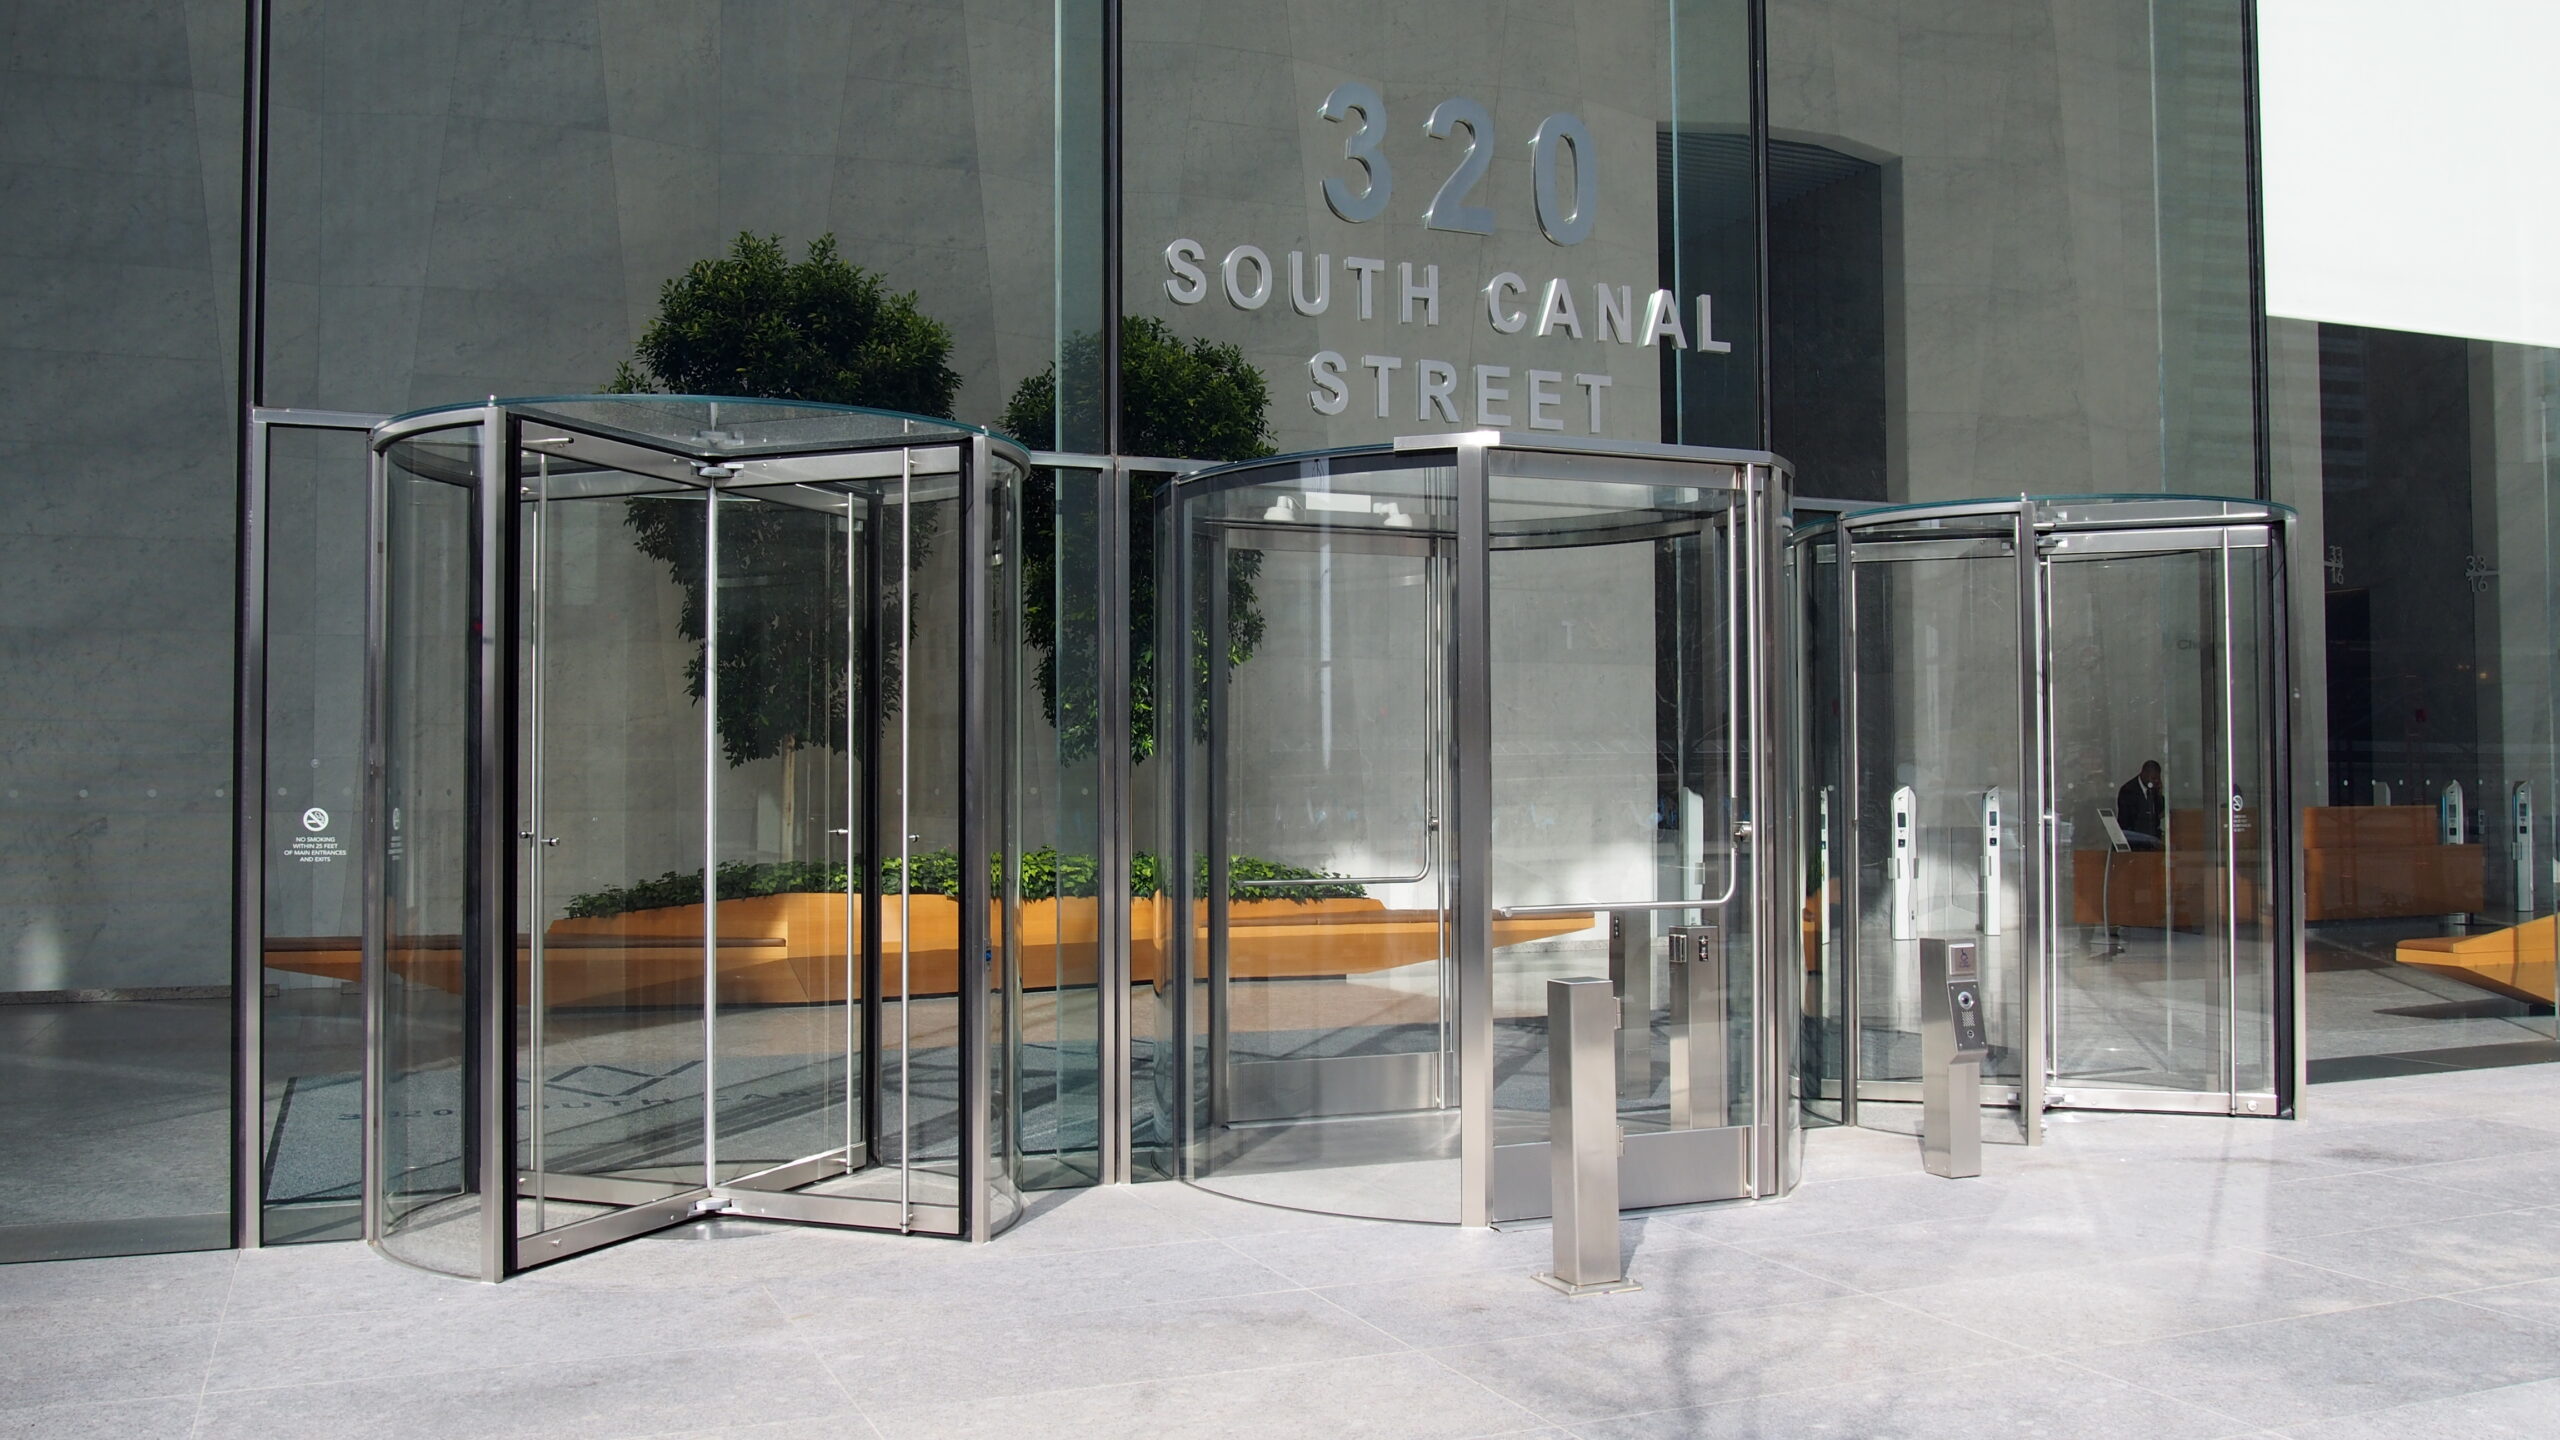 A photo of an architectural building product. An exterior entrance to the lobby of a large building, showing glass revolving doors.